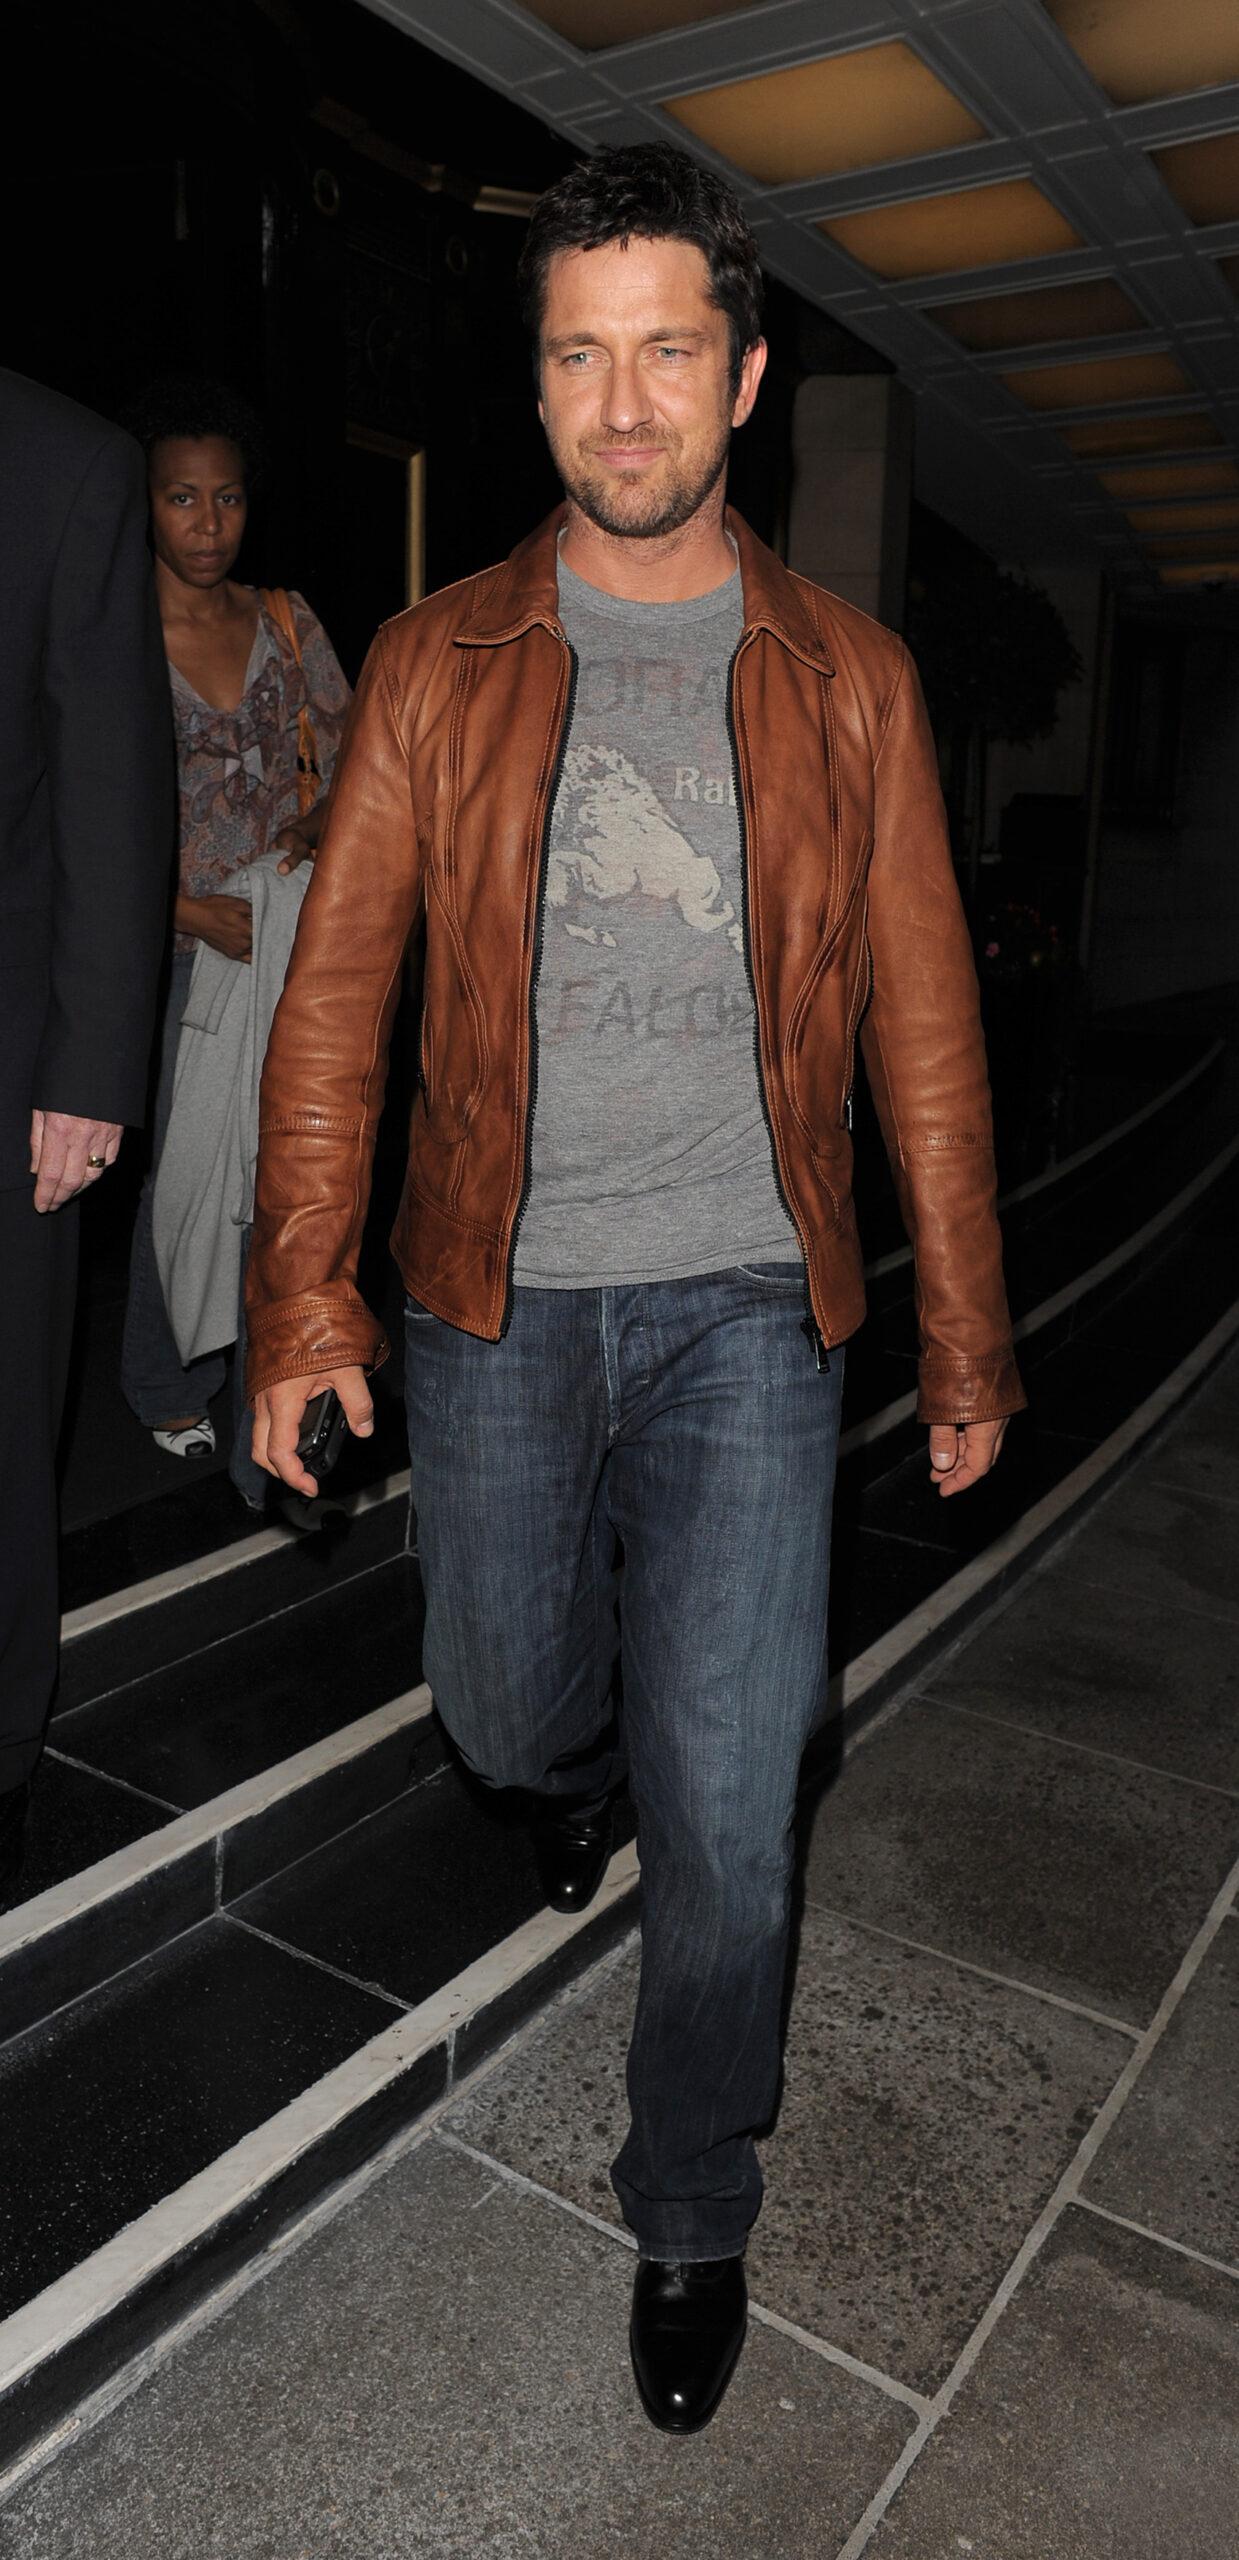 Gerard Butler leaving his hotel to go for dinner at Hakkasan restaurant He spent around two hours inside and wore a brown leather jacket grey t-shirt and jeans for the low key outing